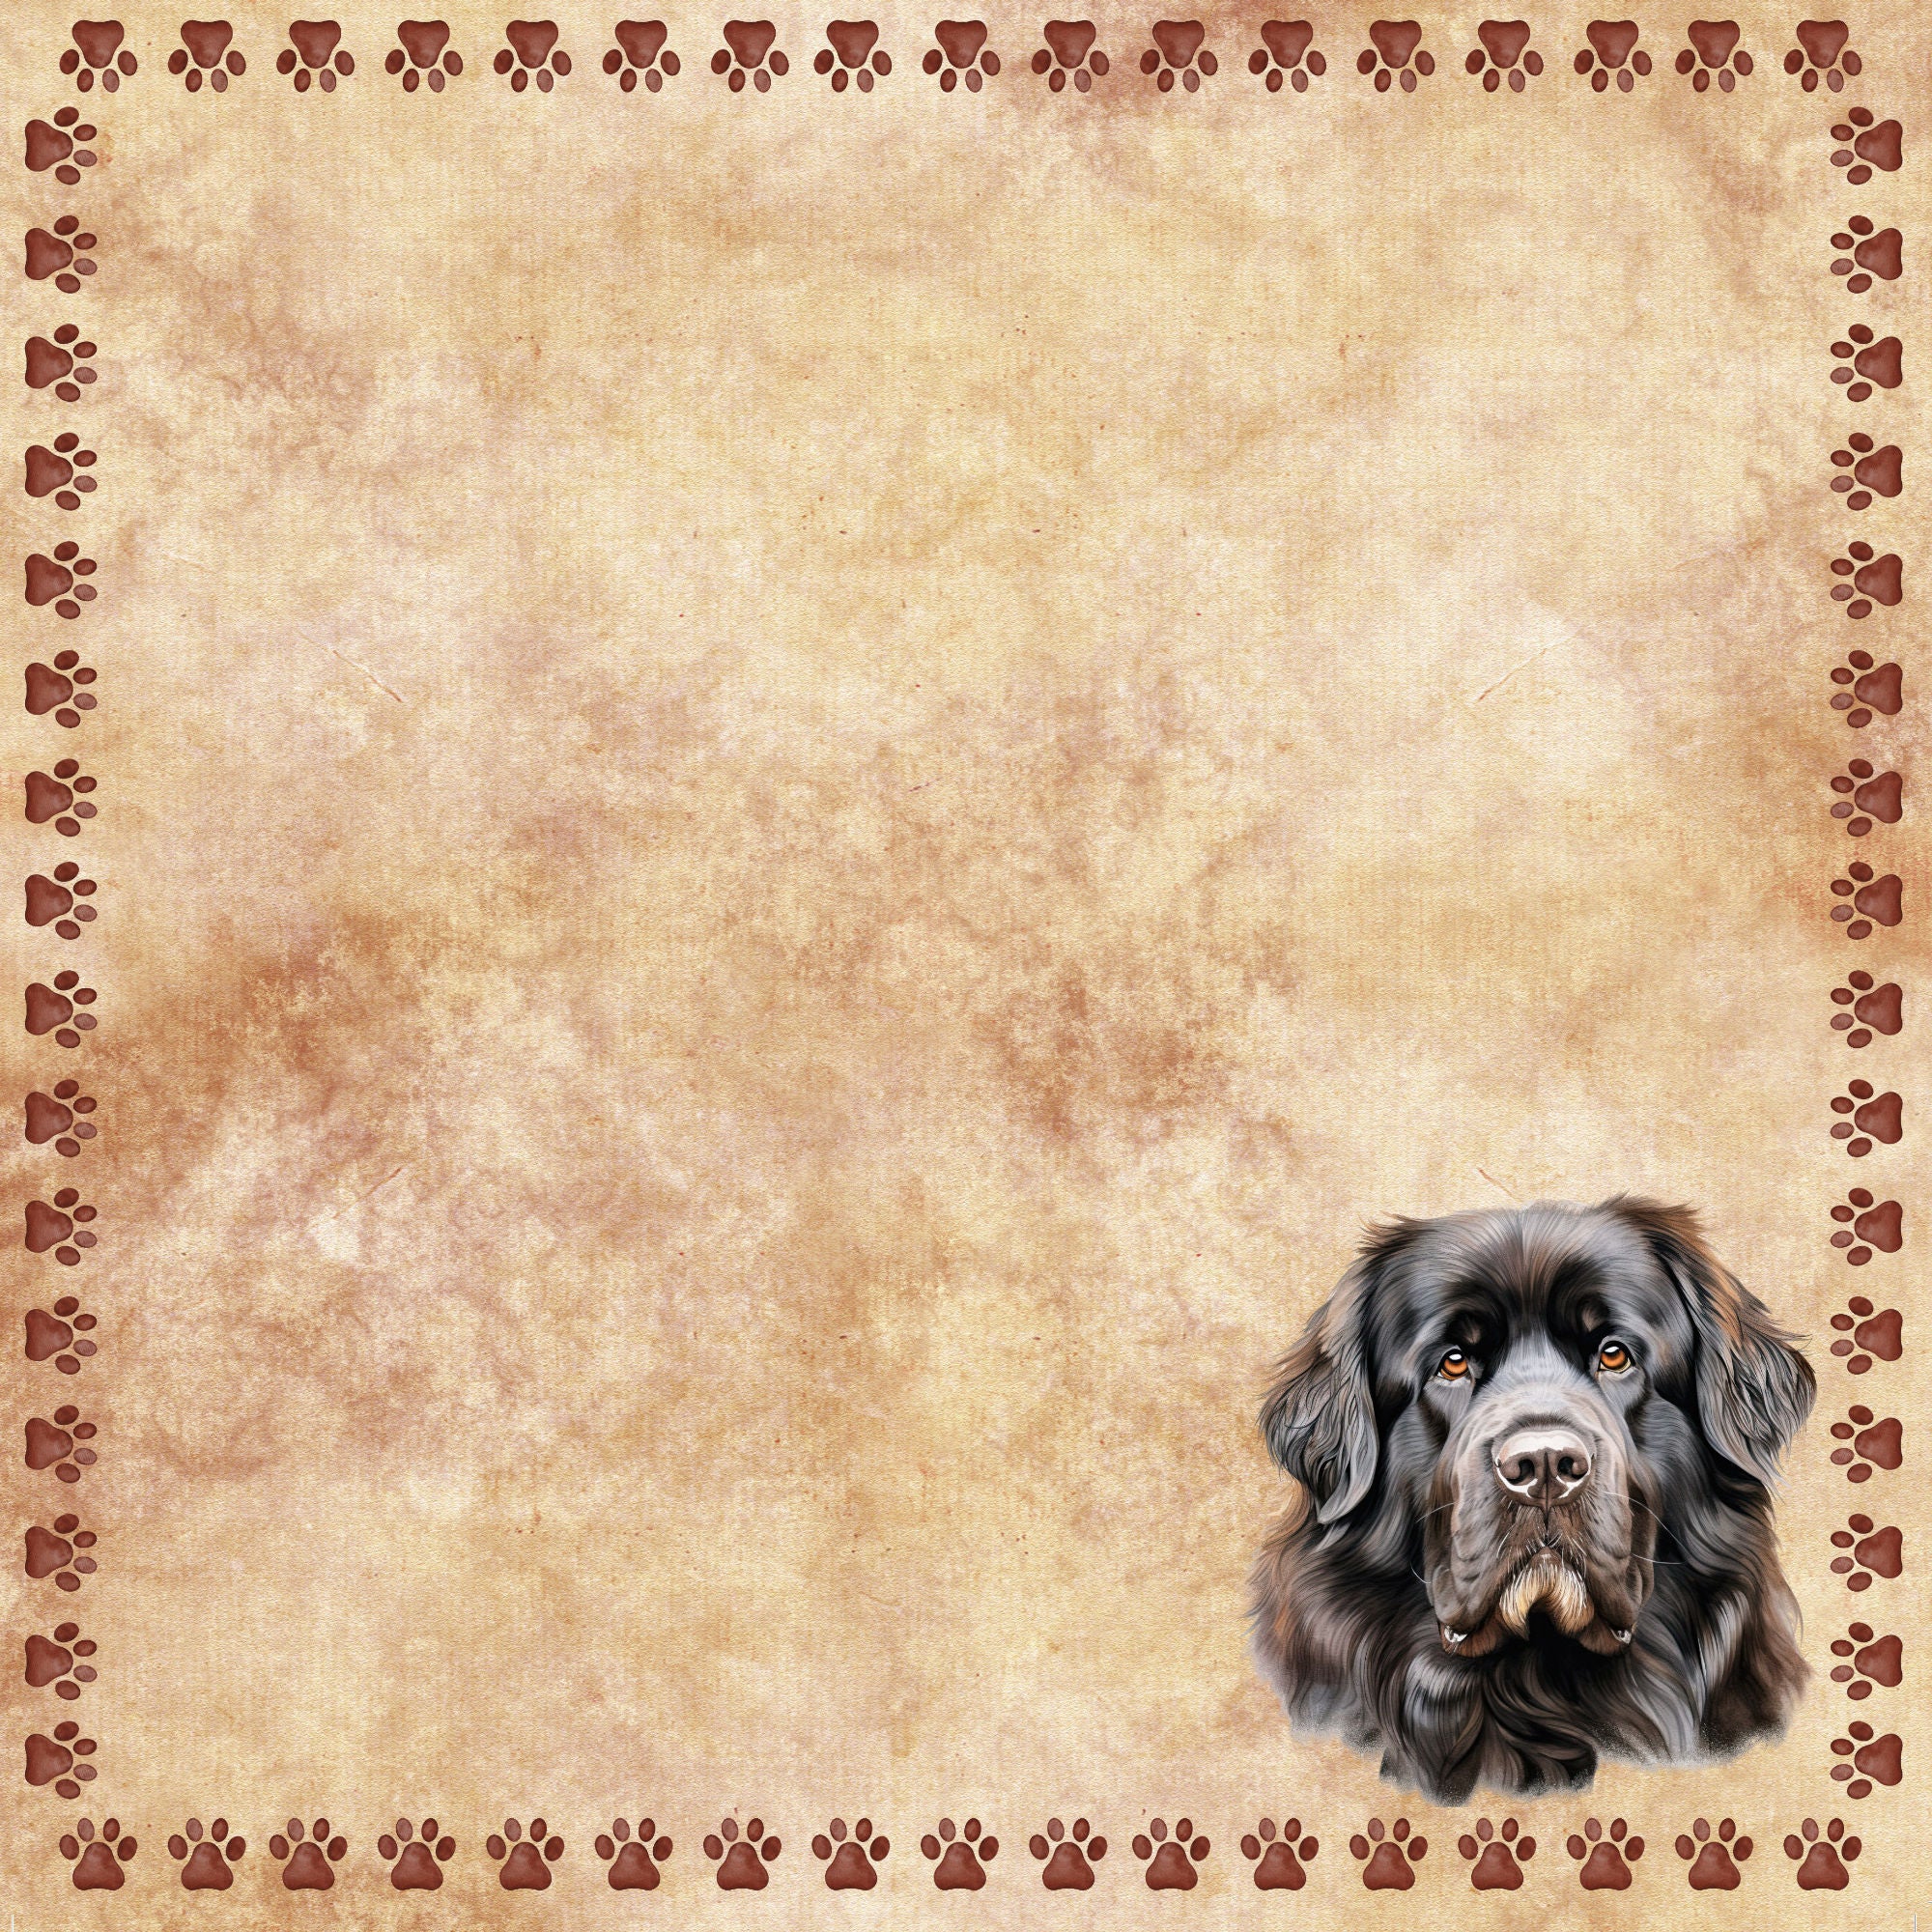 Dog Breeds Collection Newfoundland 12 x 12 Double-Sided Scrapbook Paper by SSC Designs